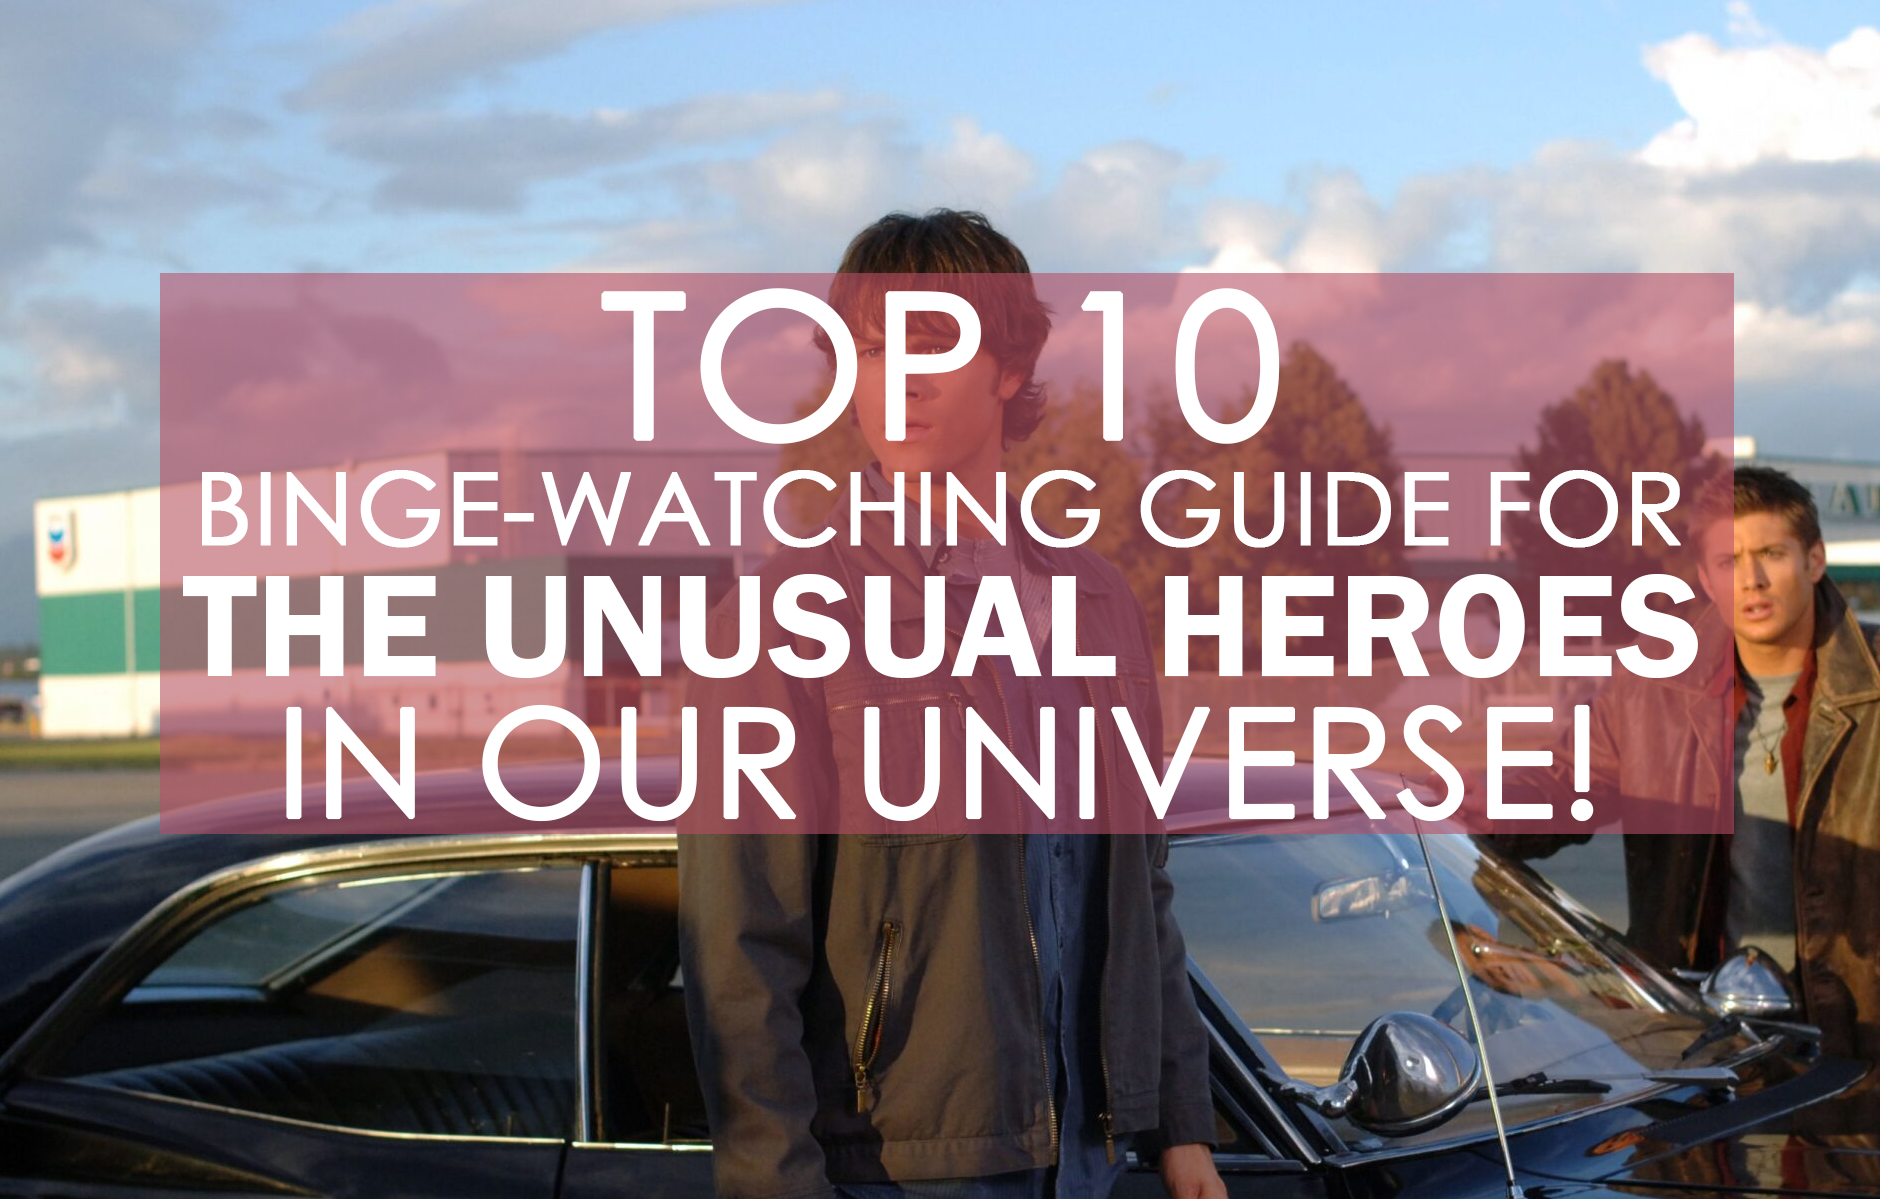 Top 10 Binge-Watching Guide For The Unusual Heroes In Our Universe!